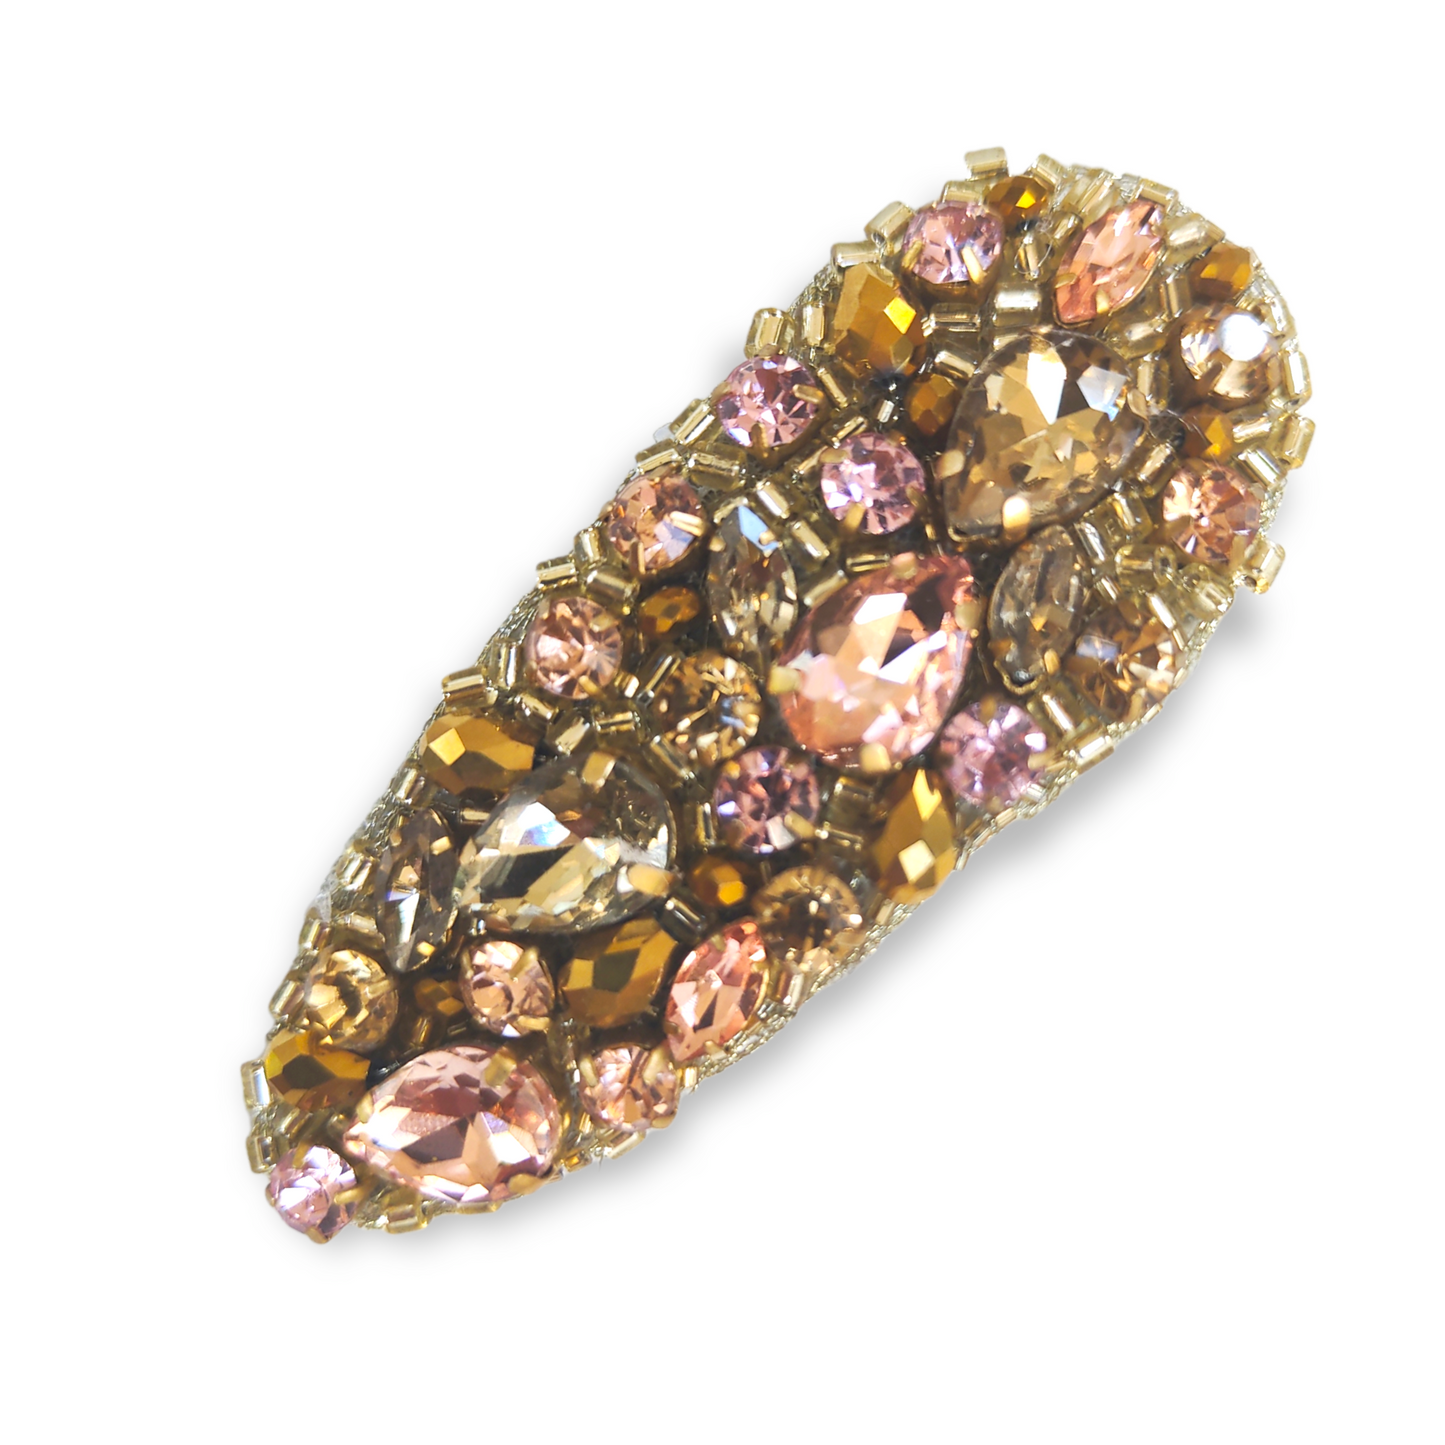 Jewelled Hair Clip - Range of colours